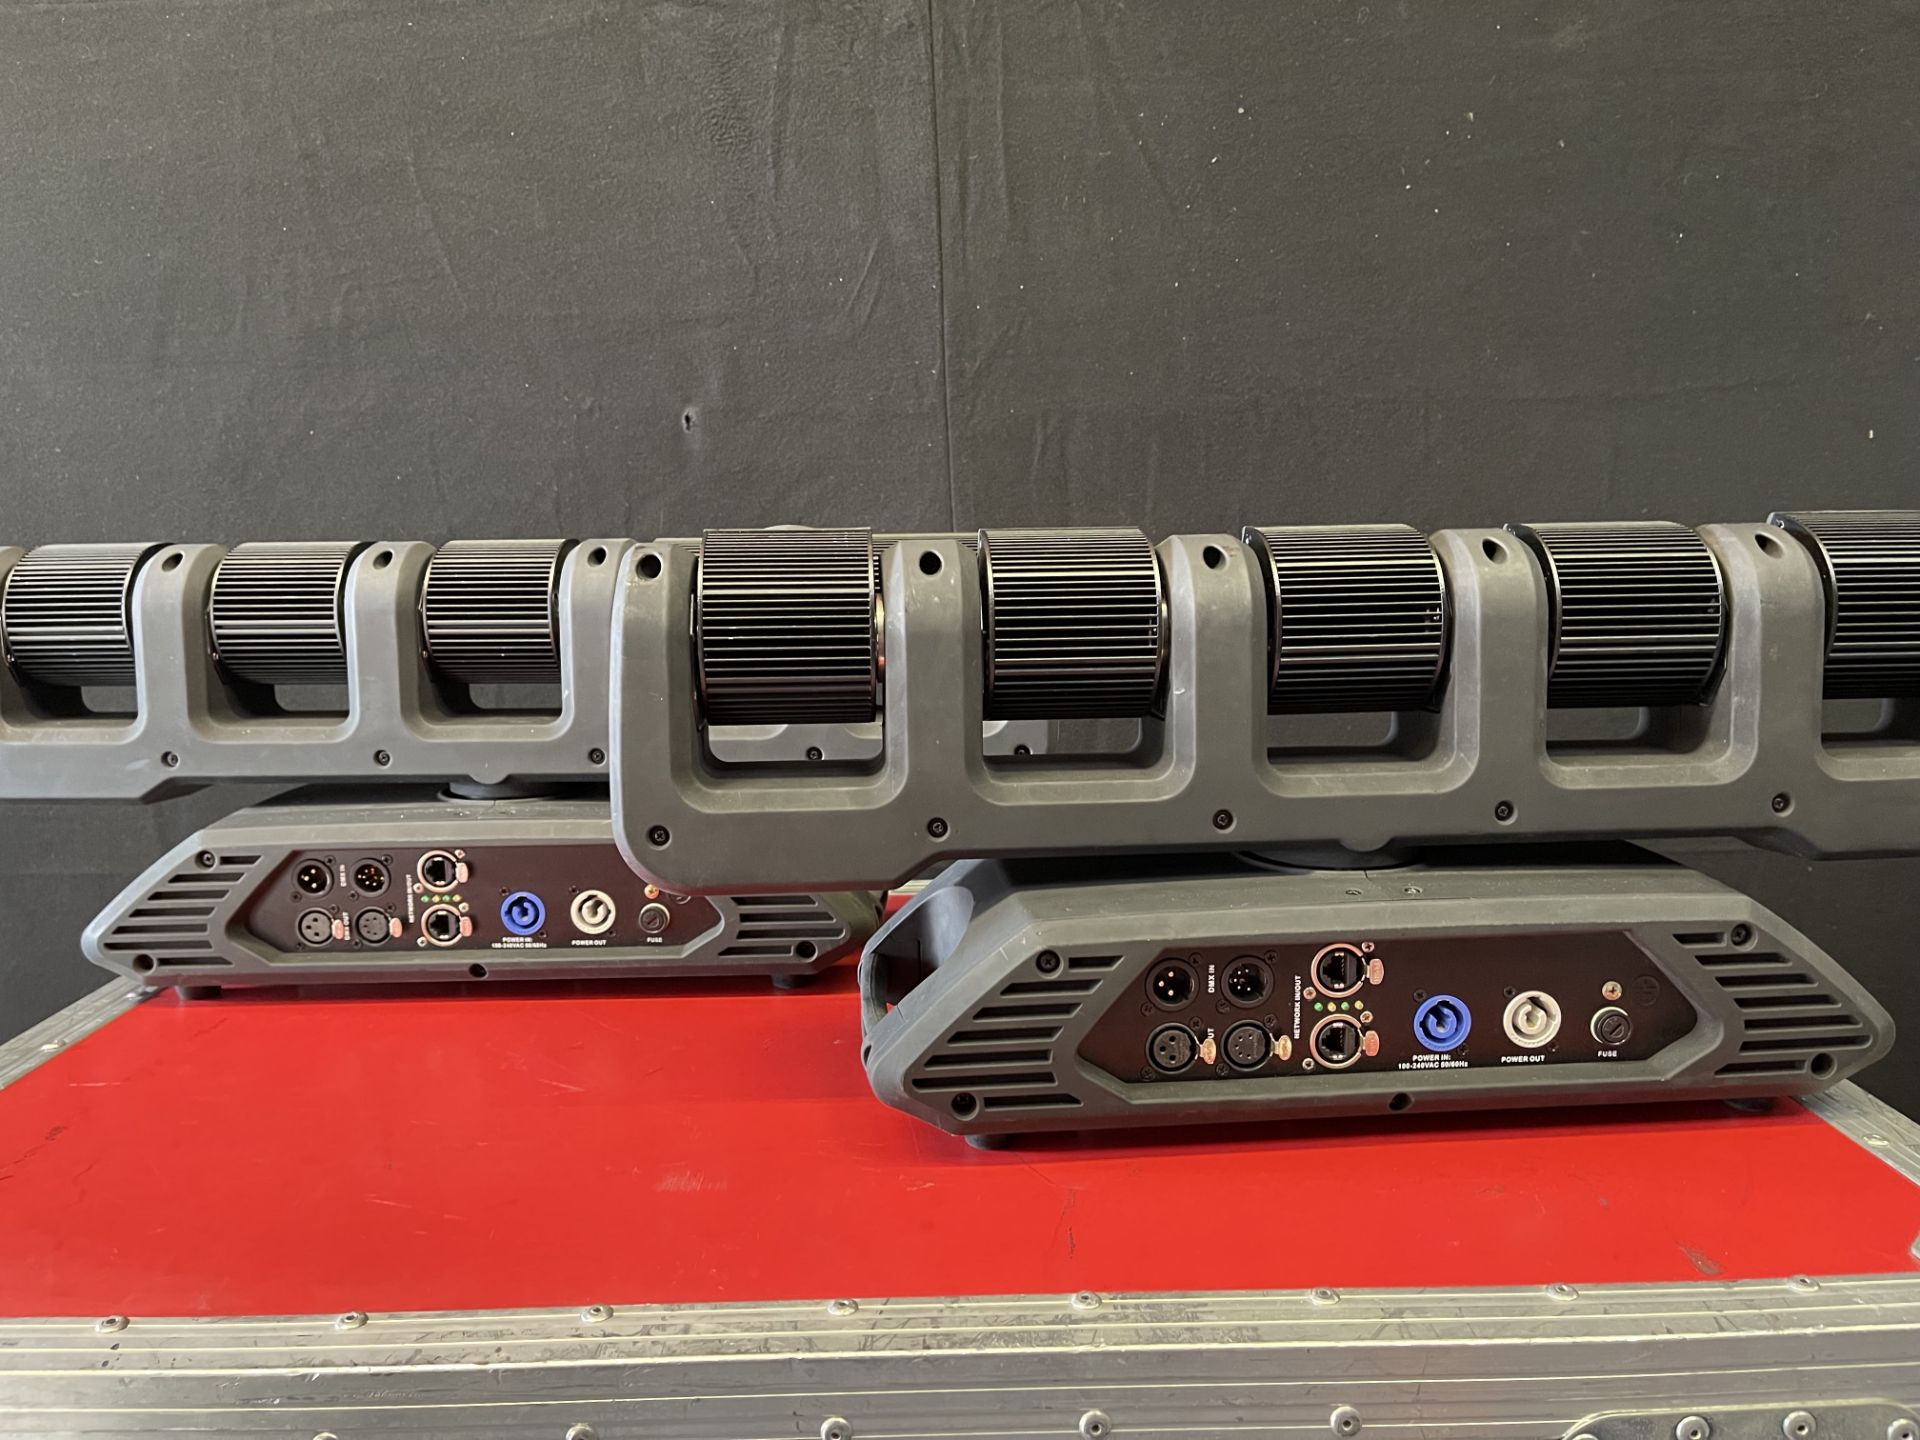 A Set of 4 Chauvet Rogue R1 FX-B Moving Head Lights, good condition, tested and working with - Image 4 of 6